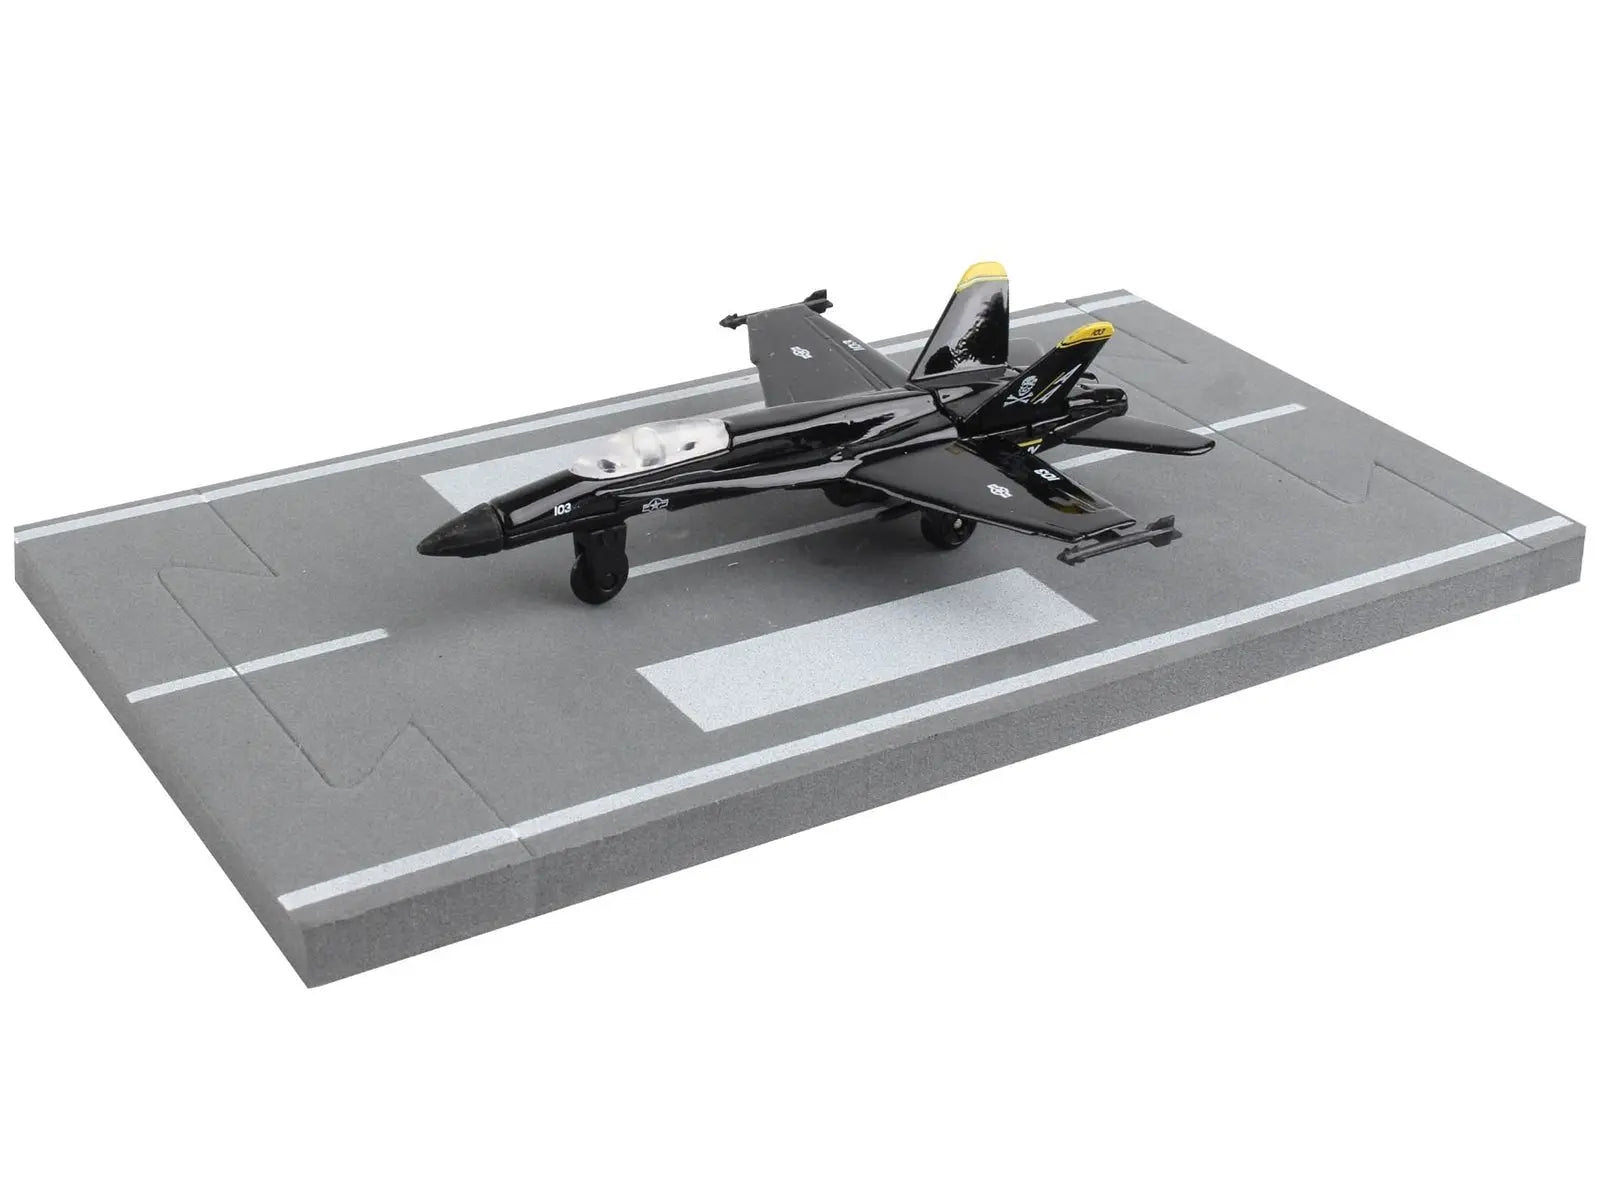 McDonnell Douglas F/A-18 Hornet Fighter Aircraft Black "United States Navy" with Runway Section Diecast Model Airplane by Runway24 Runway24